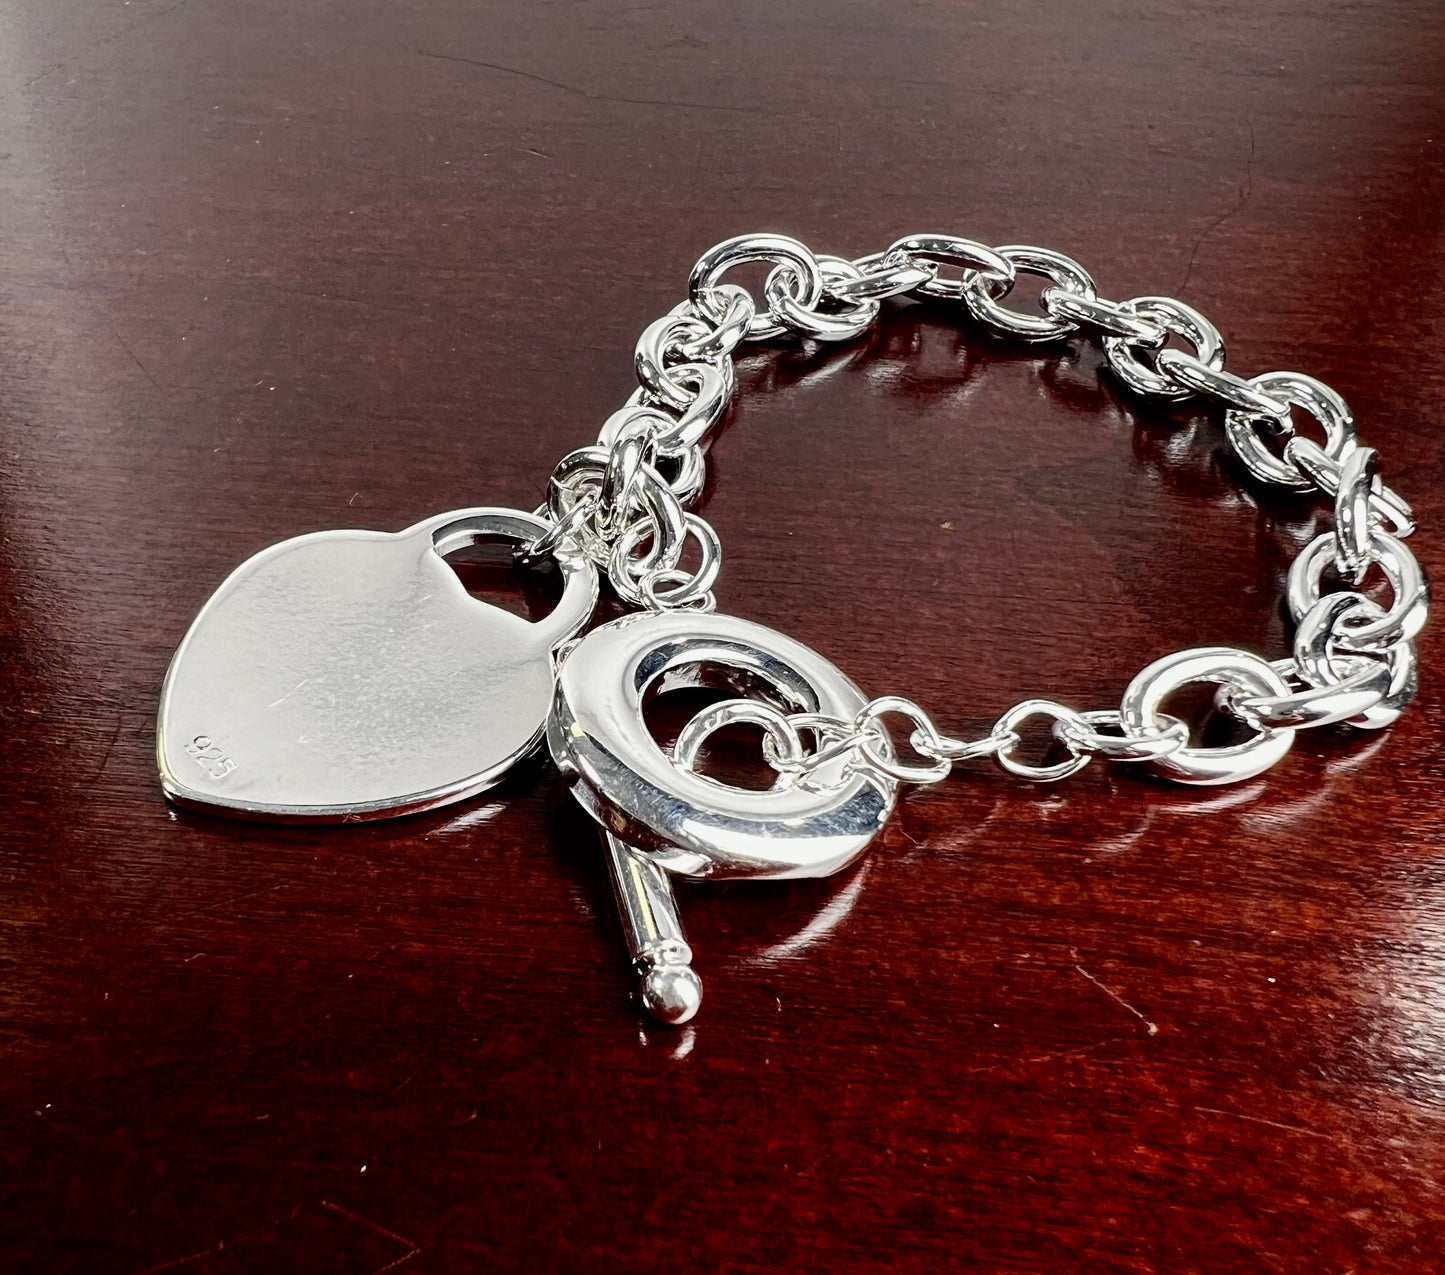 925 Sterling Silver Filled Heart charm dangling Oval Link Toggle Bracelet 7.5” Valentine, Girlfriend Gift, 26 gram Heavy Weight